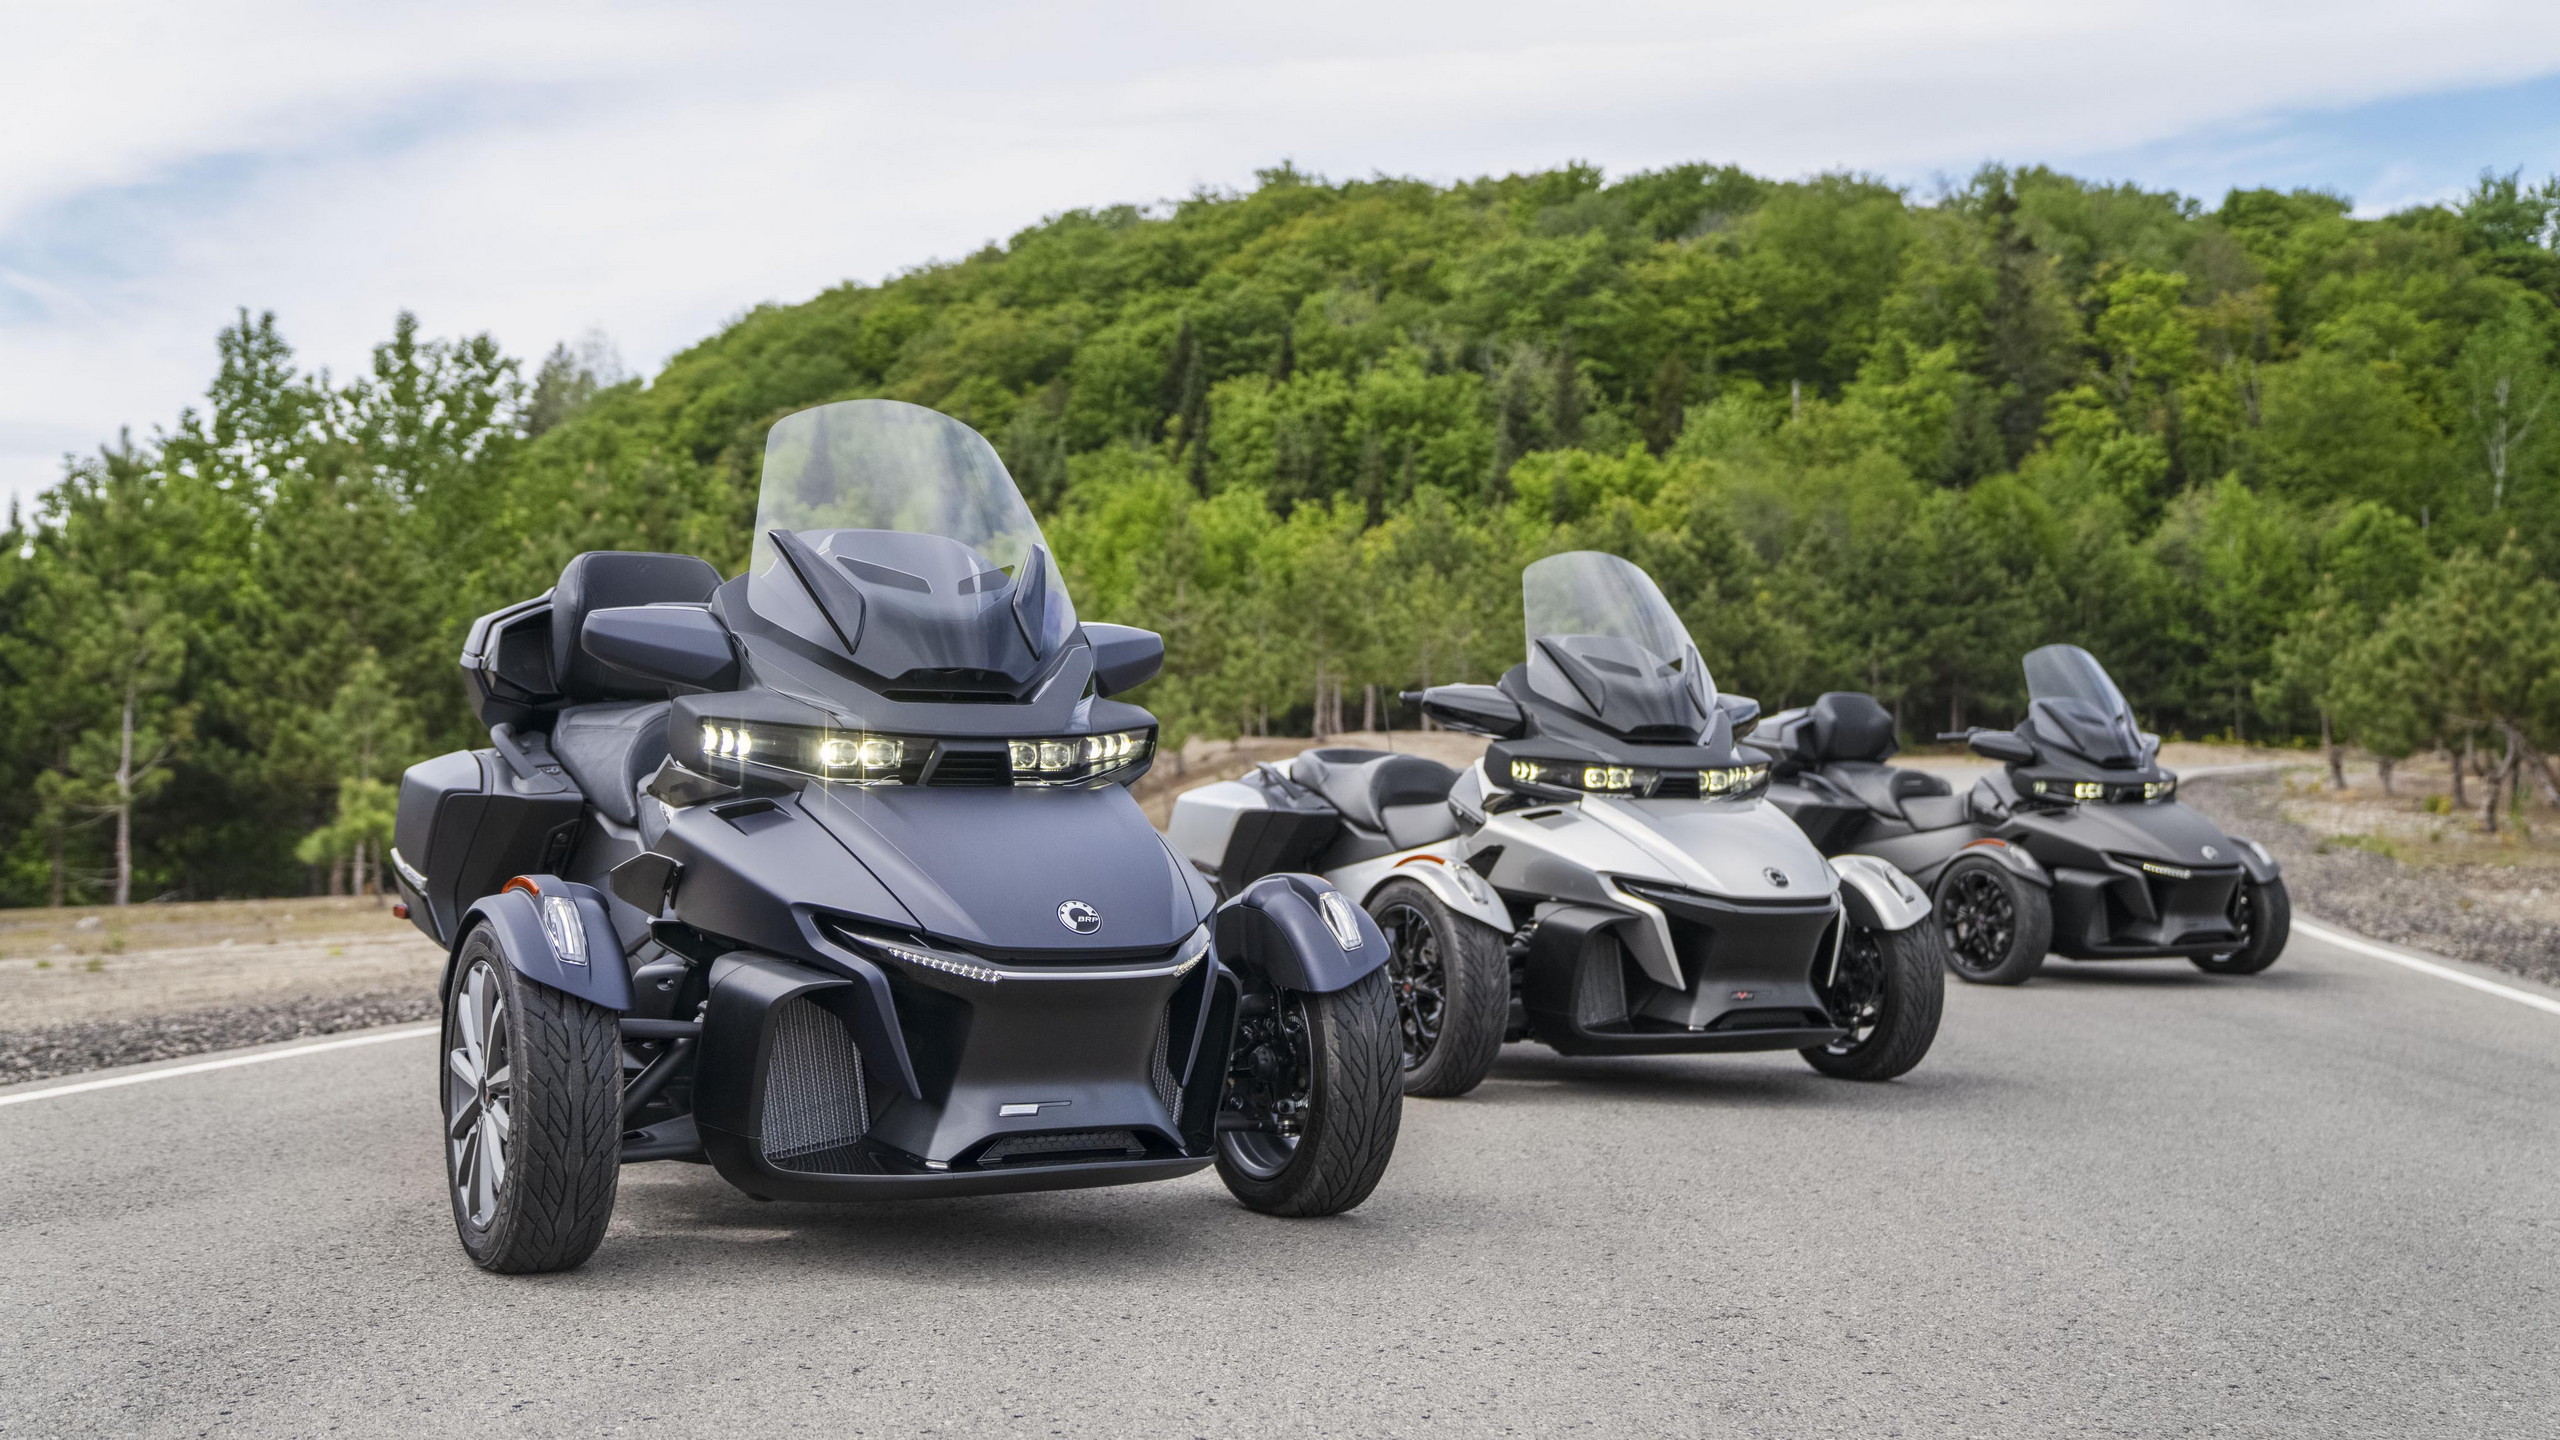 2022 Can-Am Spyder RT Is All About Luxury Cruising, Promises Wild